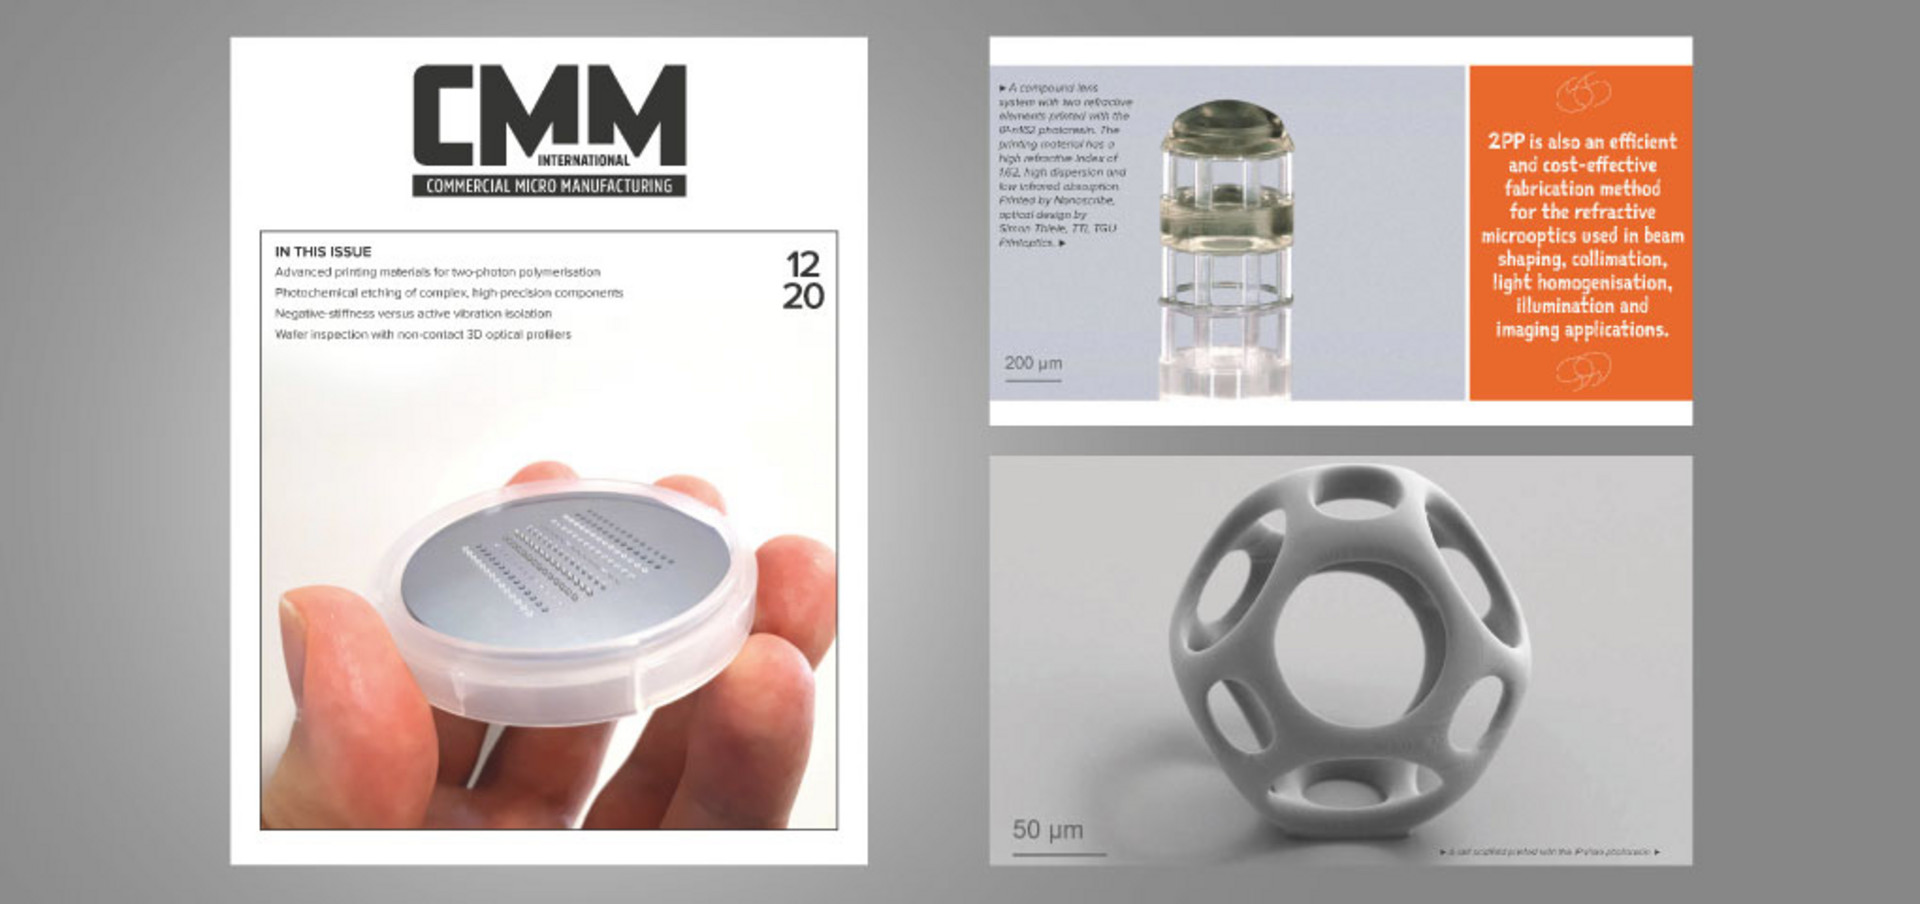 Nanoscribe features cover and article in the December issue of CMM magazine